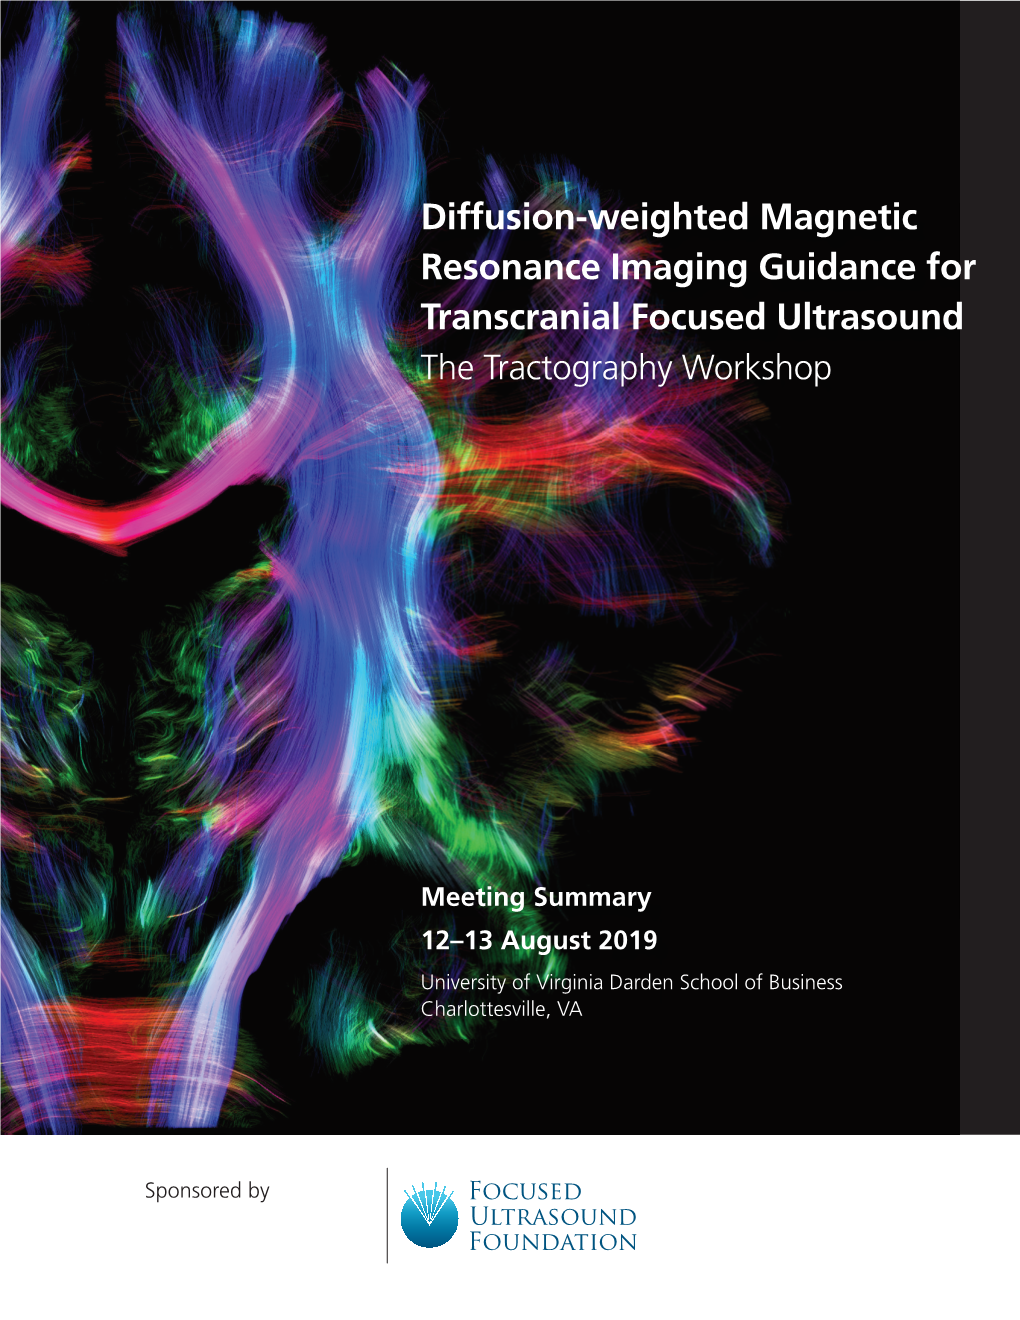 FUSF Tractography Workshop Report #7.Indd